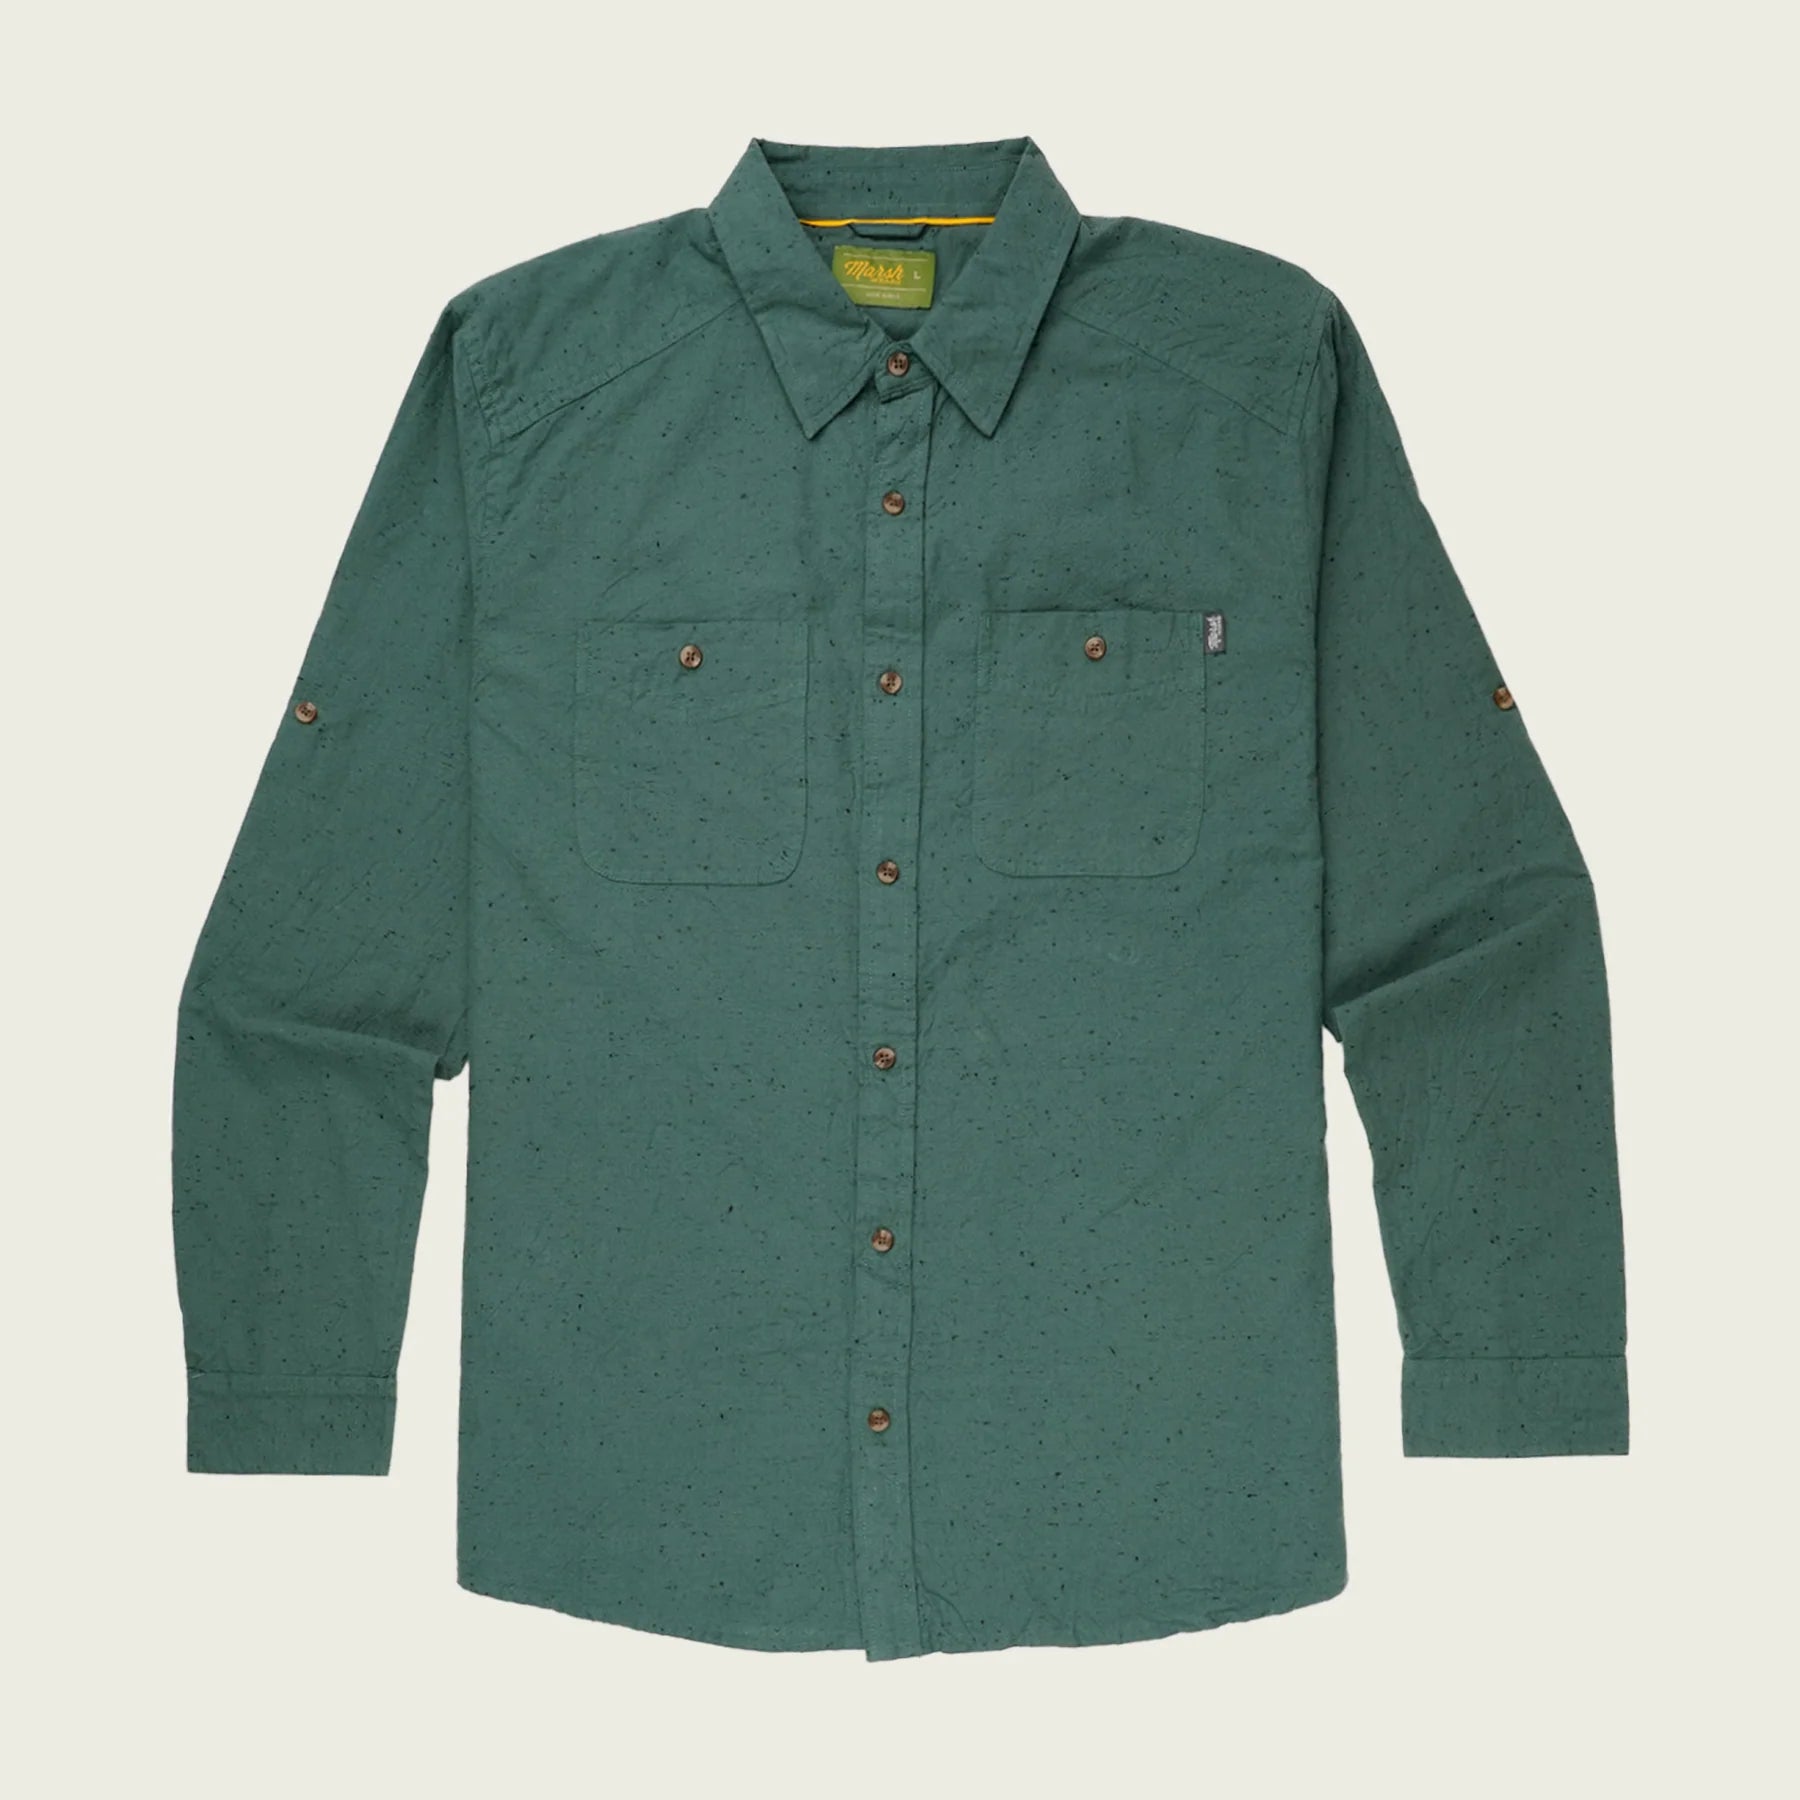 Marsh Wear Chalmers Chamois Button Up